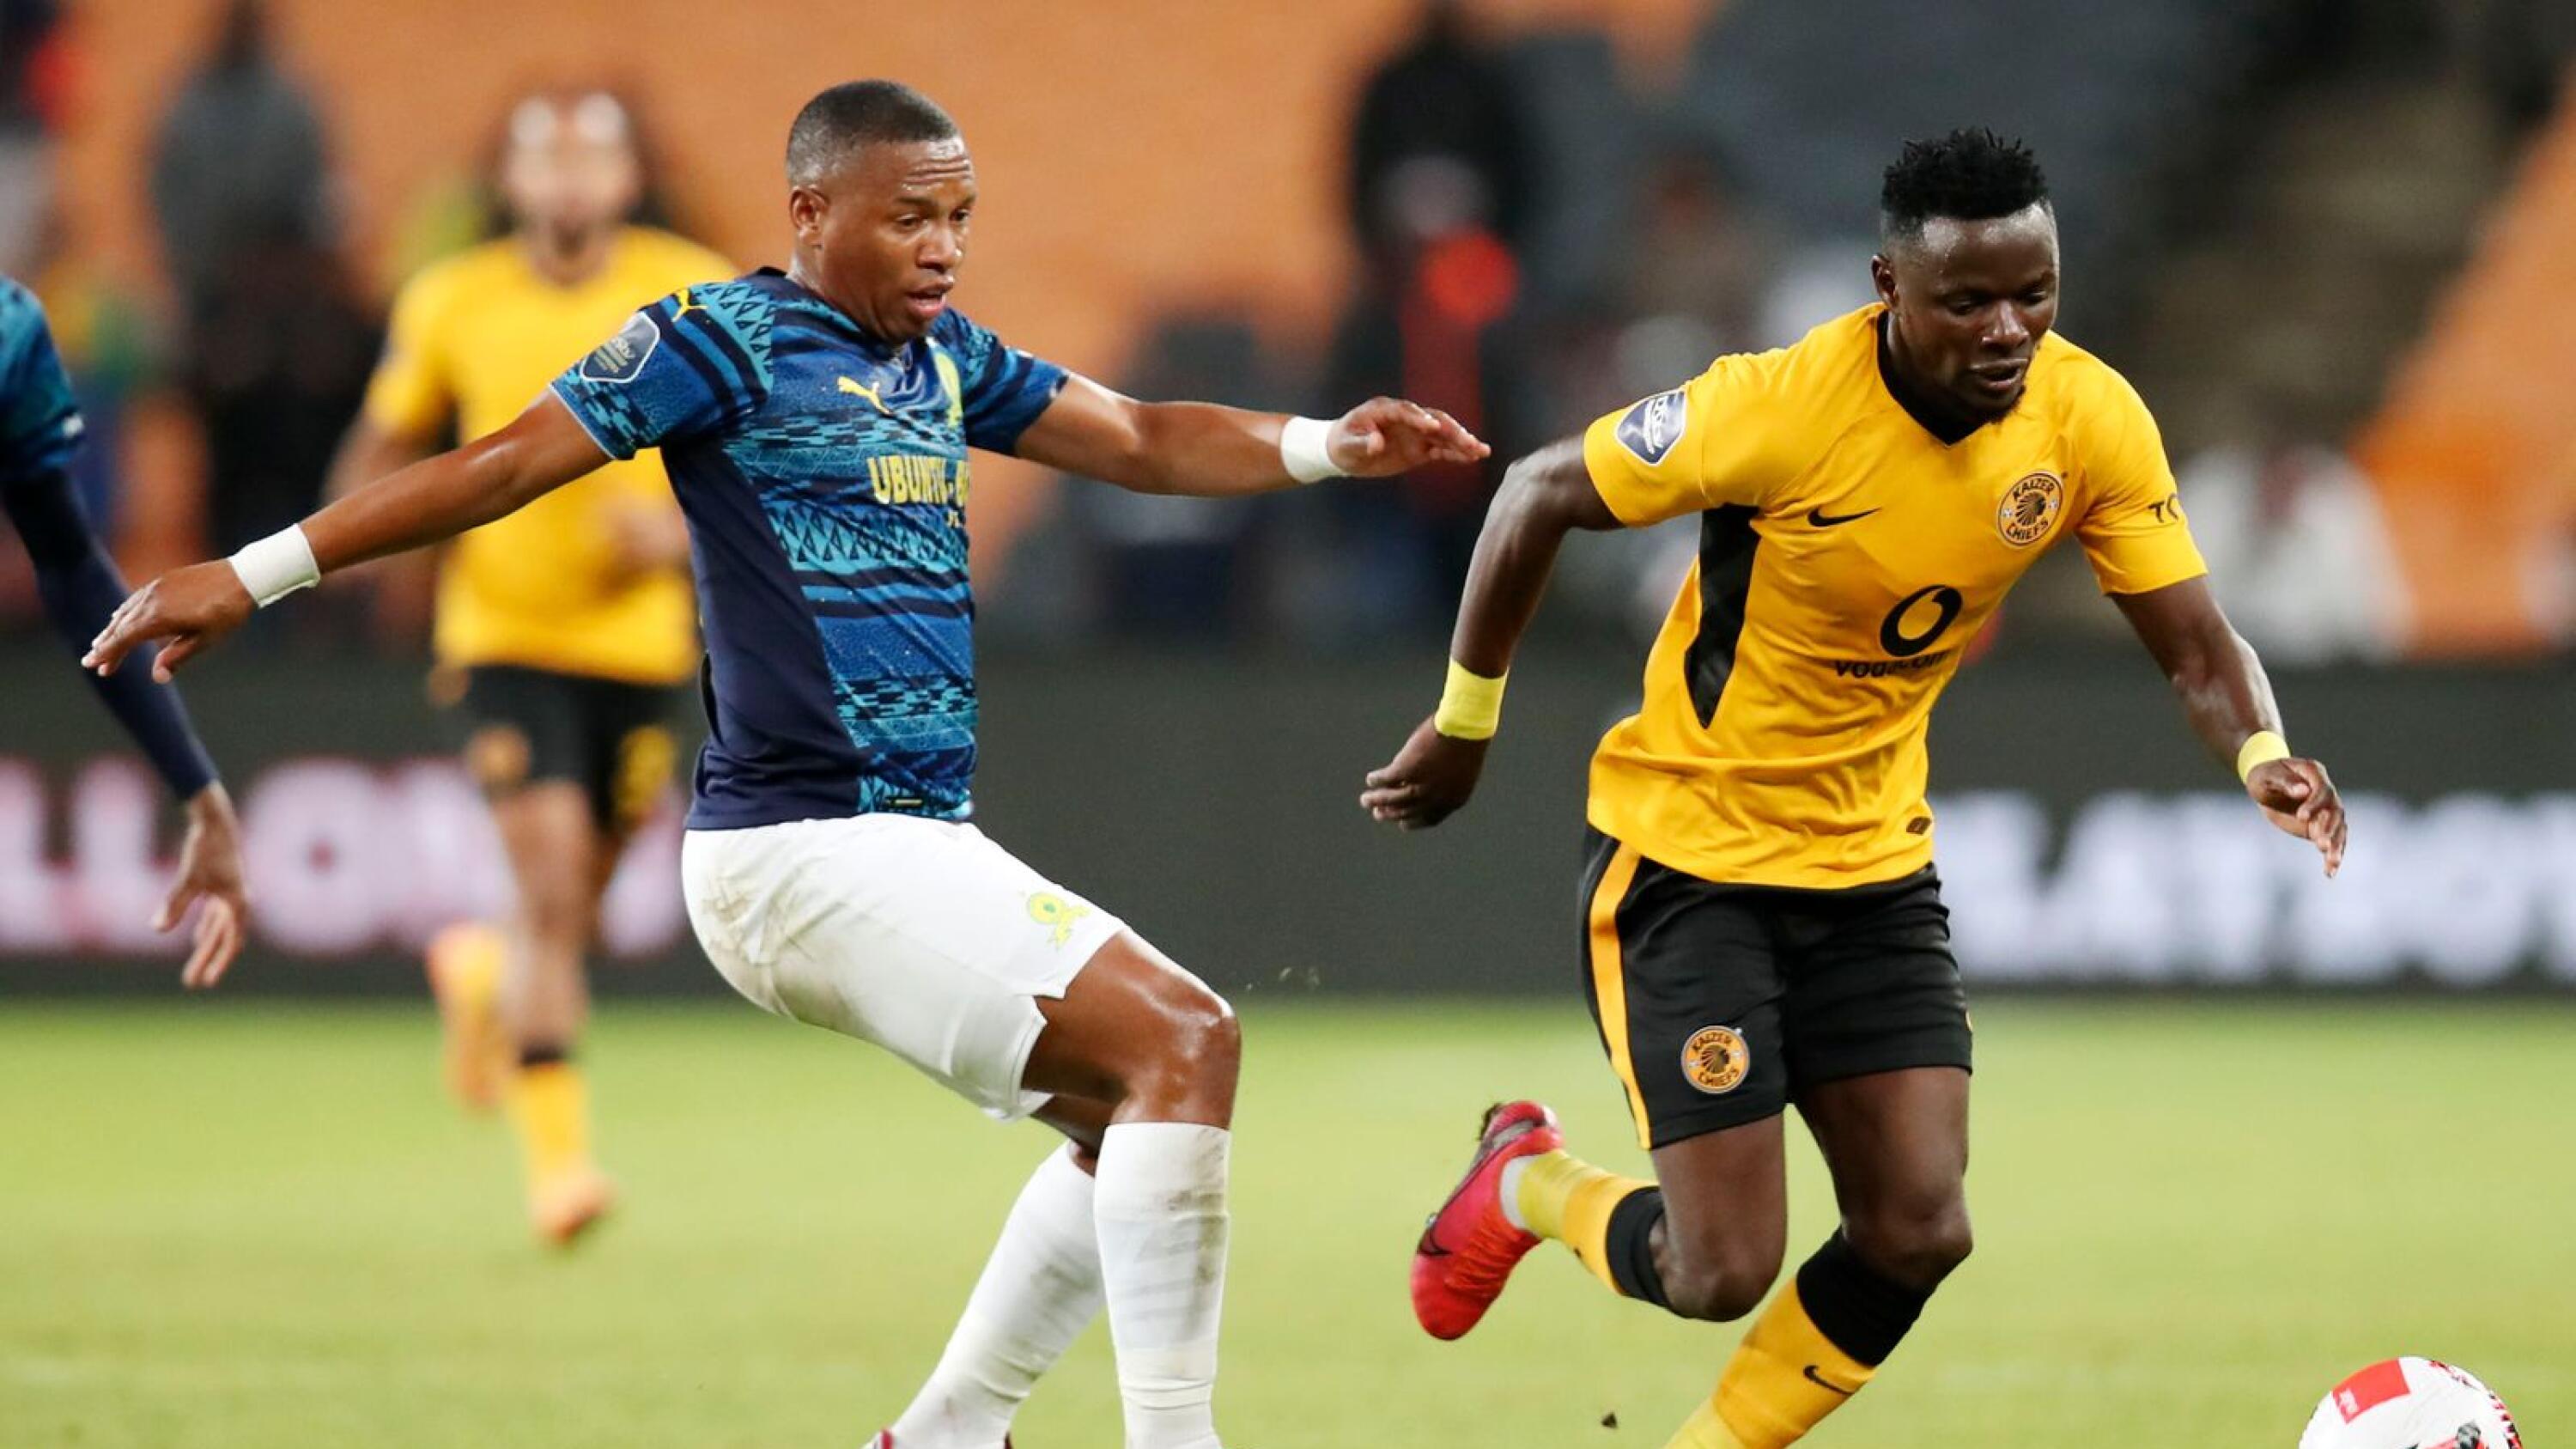 Kaizer Chiefs’ Lazarous Kambole is challenged by Andile Jali of Mamelodi Sundowns during their DStv Premiership match at the FNB Stadium in Johannesburg on Sunday